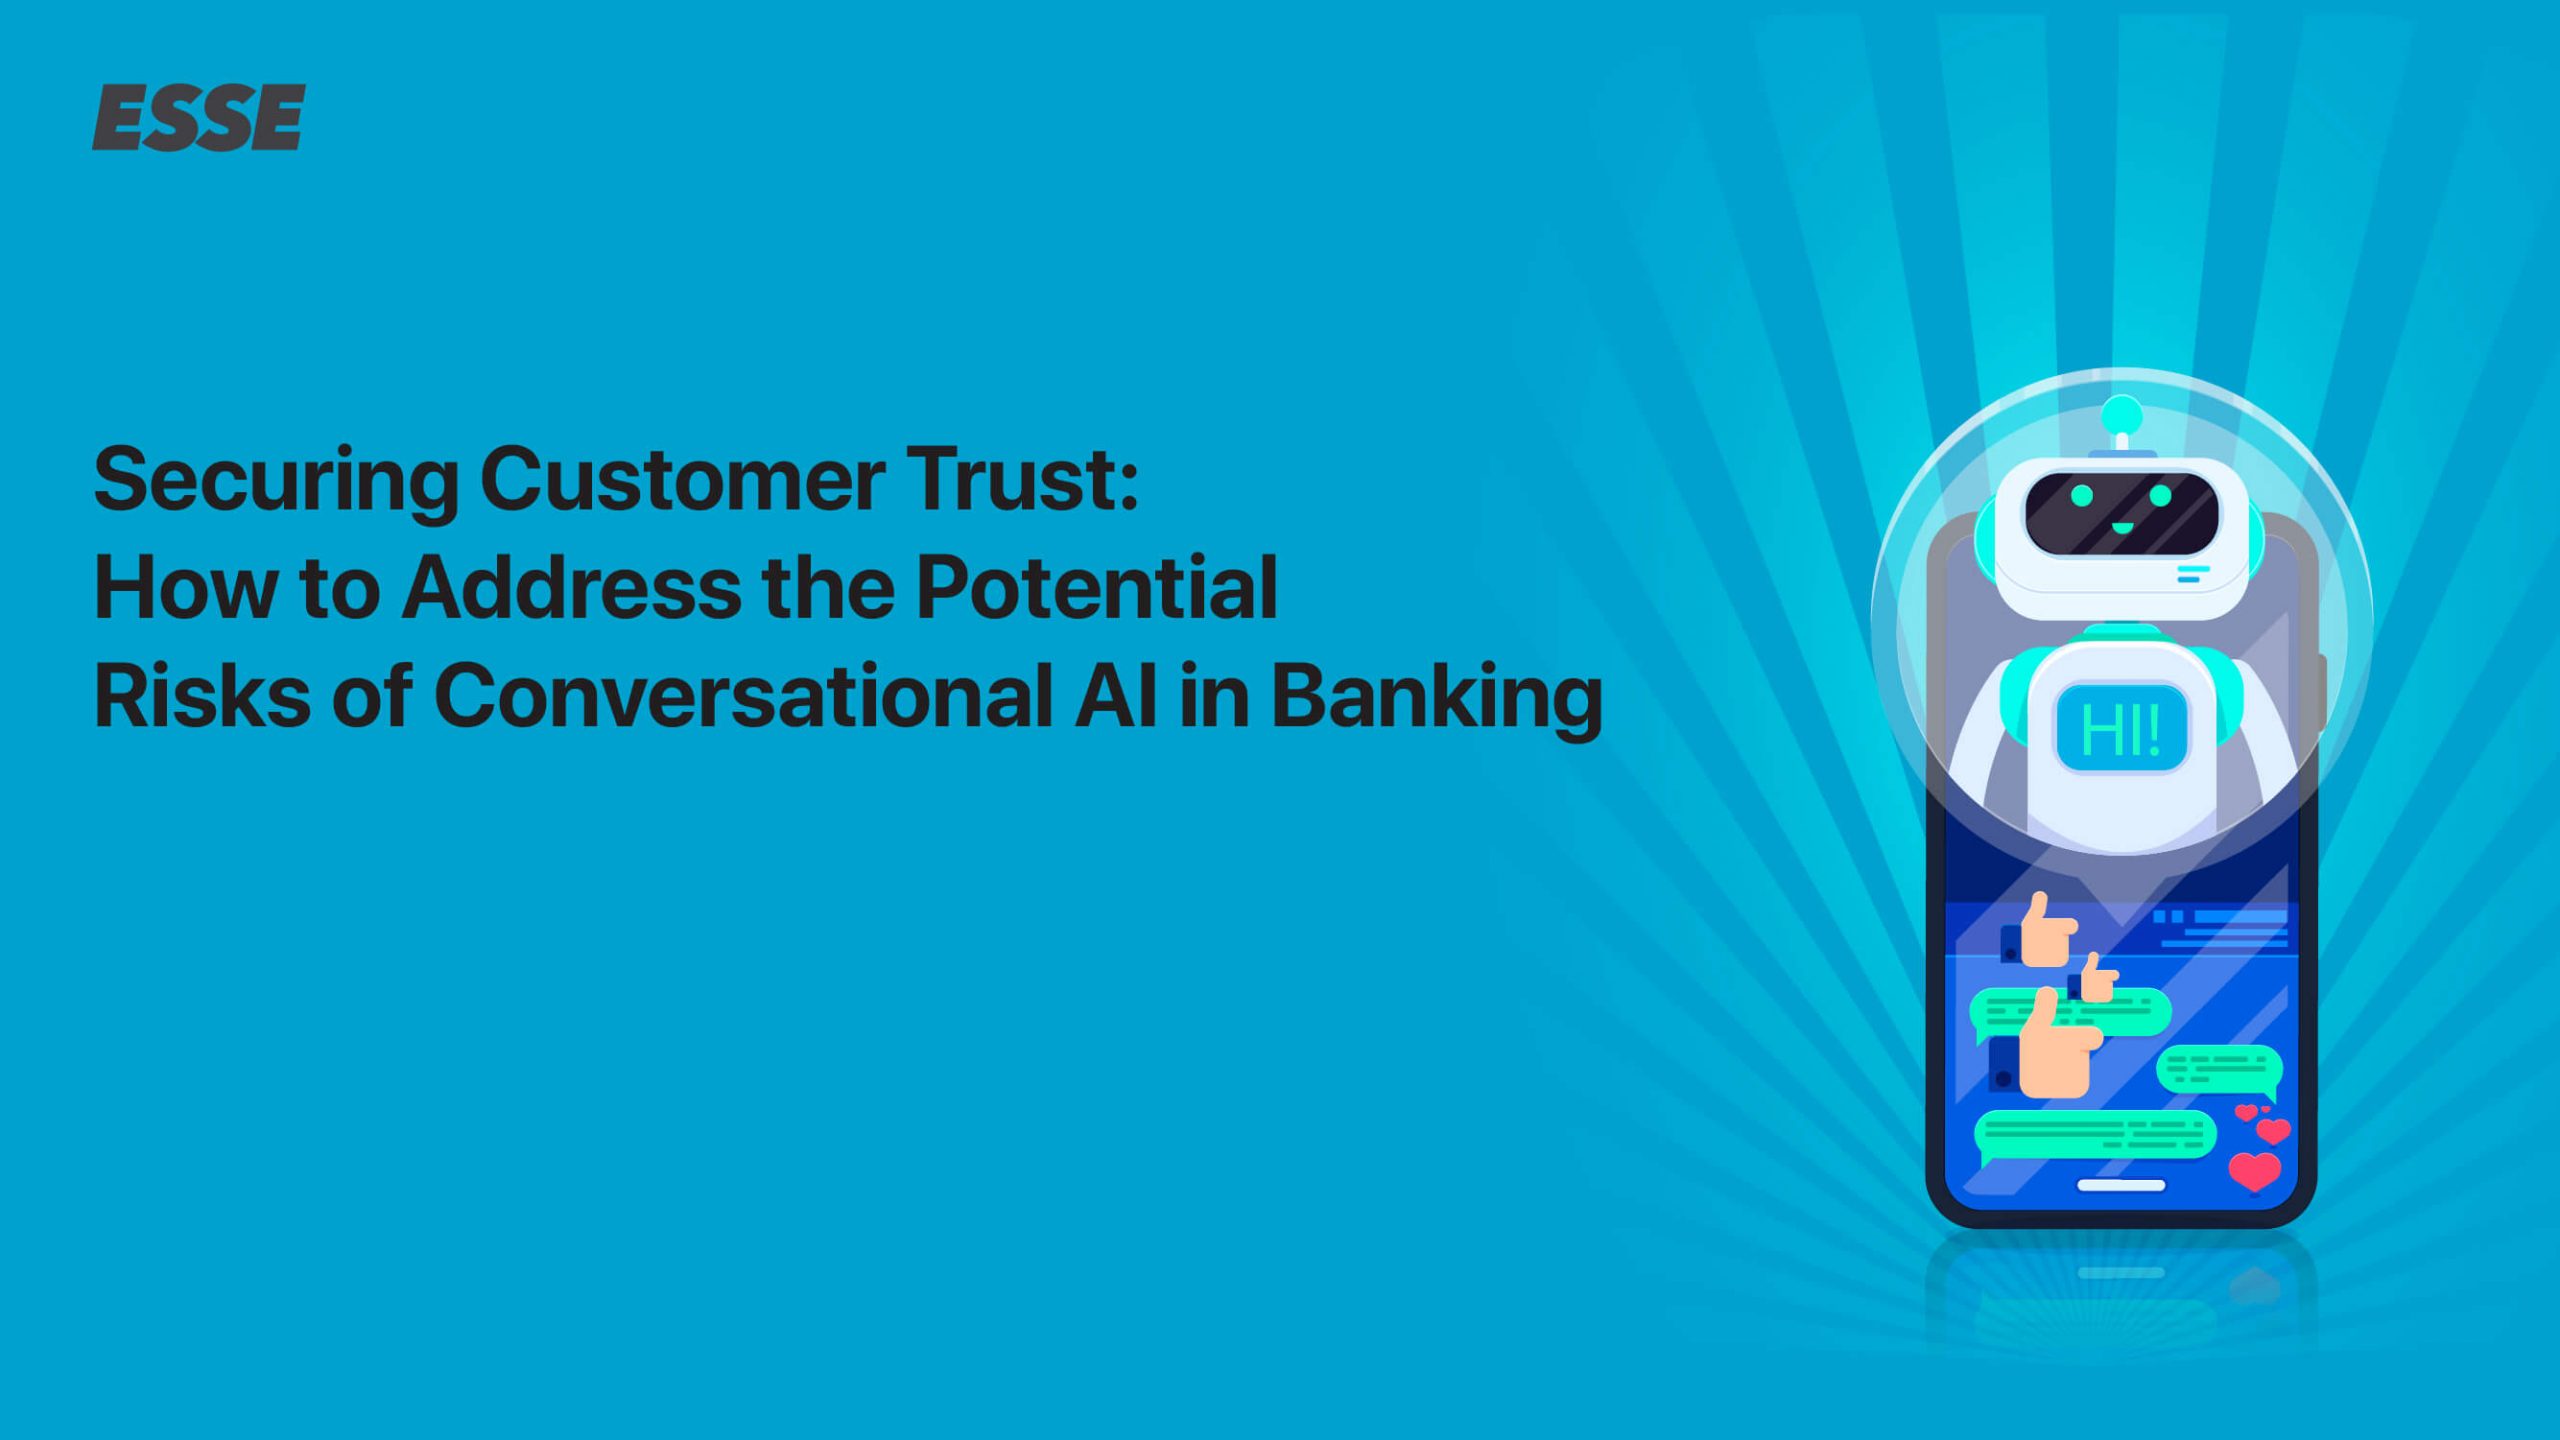 Securing Customer Trust: How to Address the Potential Risks of Conversational AI in Banking